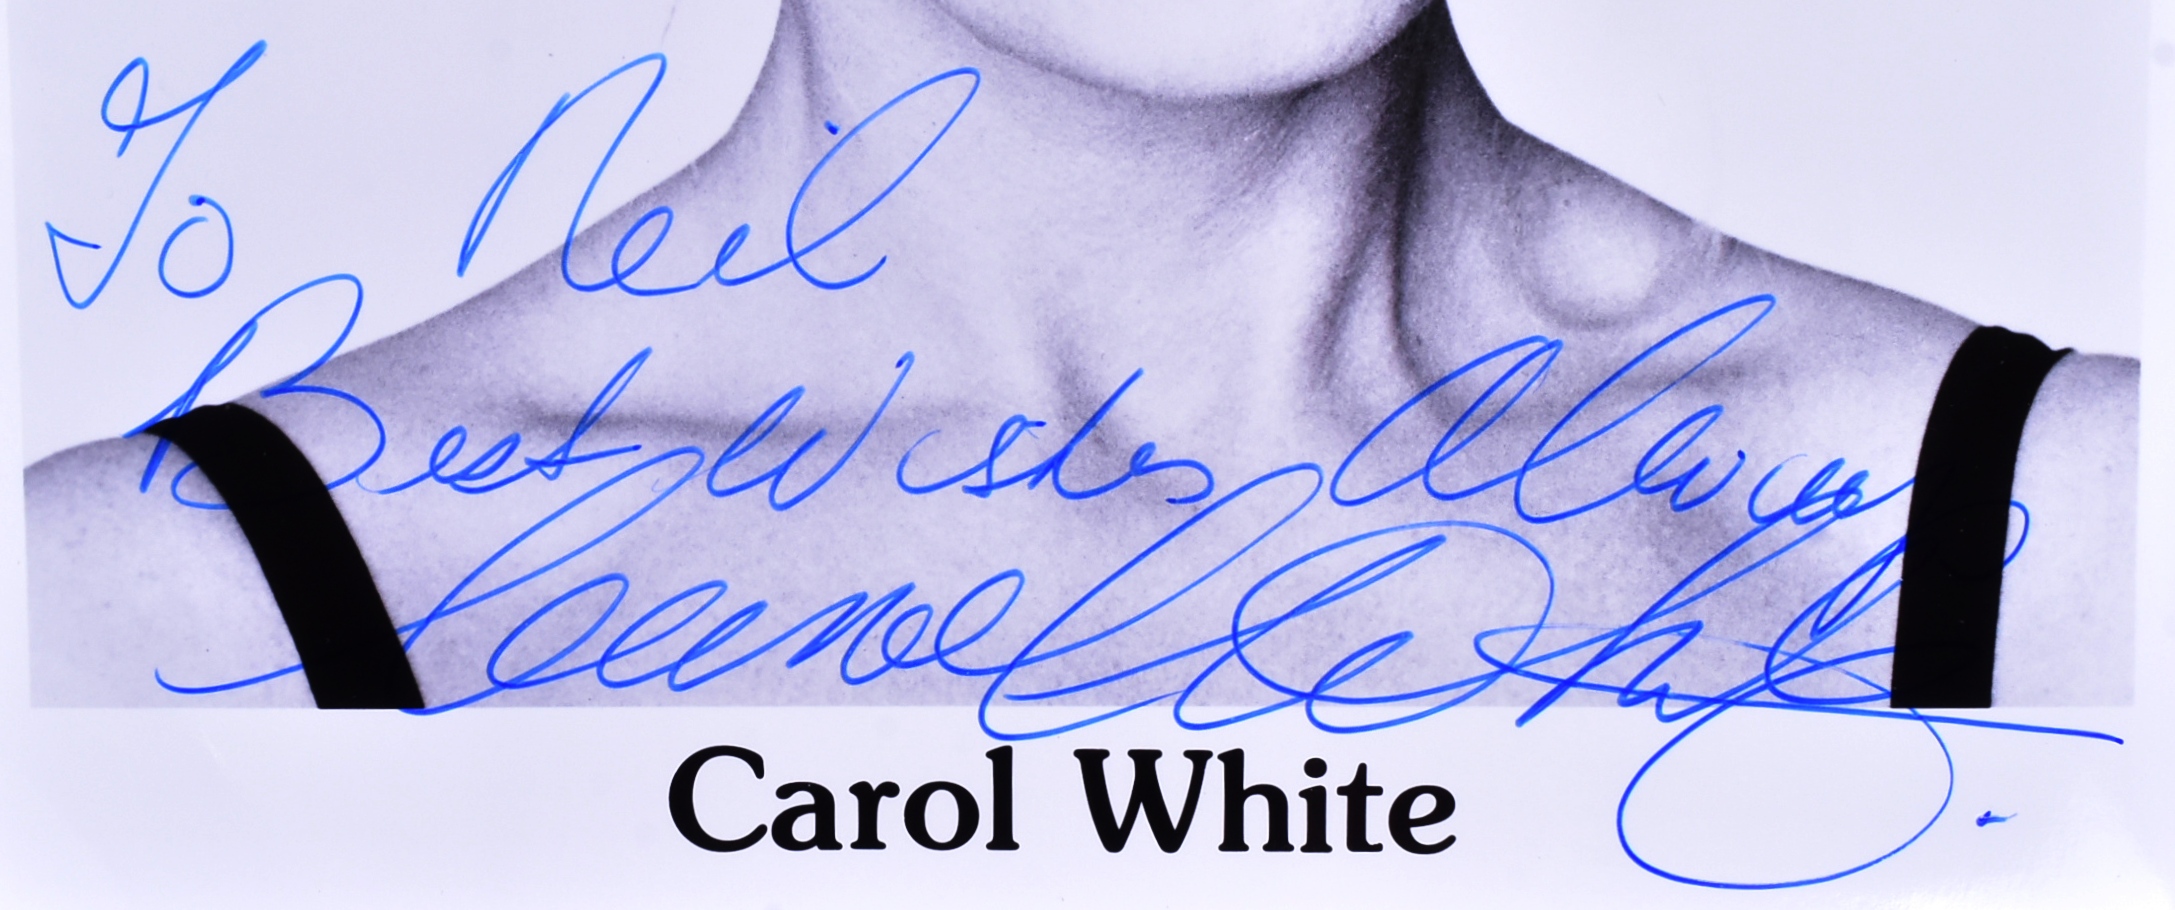 CAROL WHITE (D.1991) - CARRY ON / CATHY COME HOME / POOR COW - Image 2 of 2